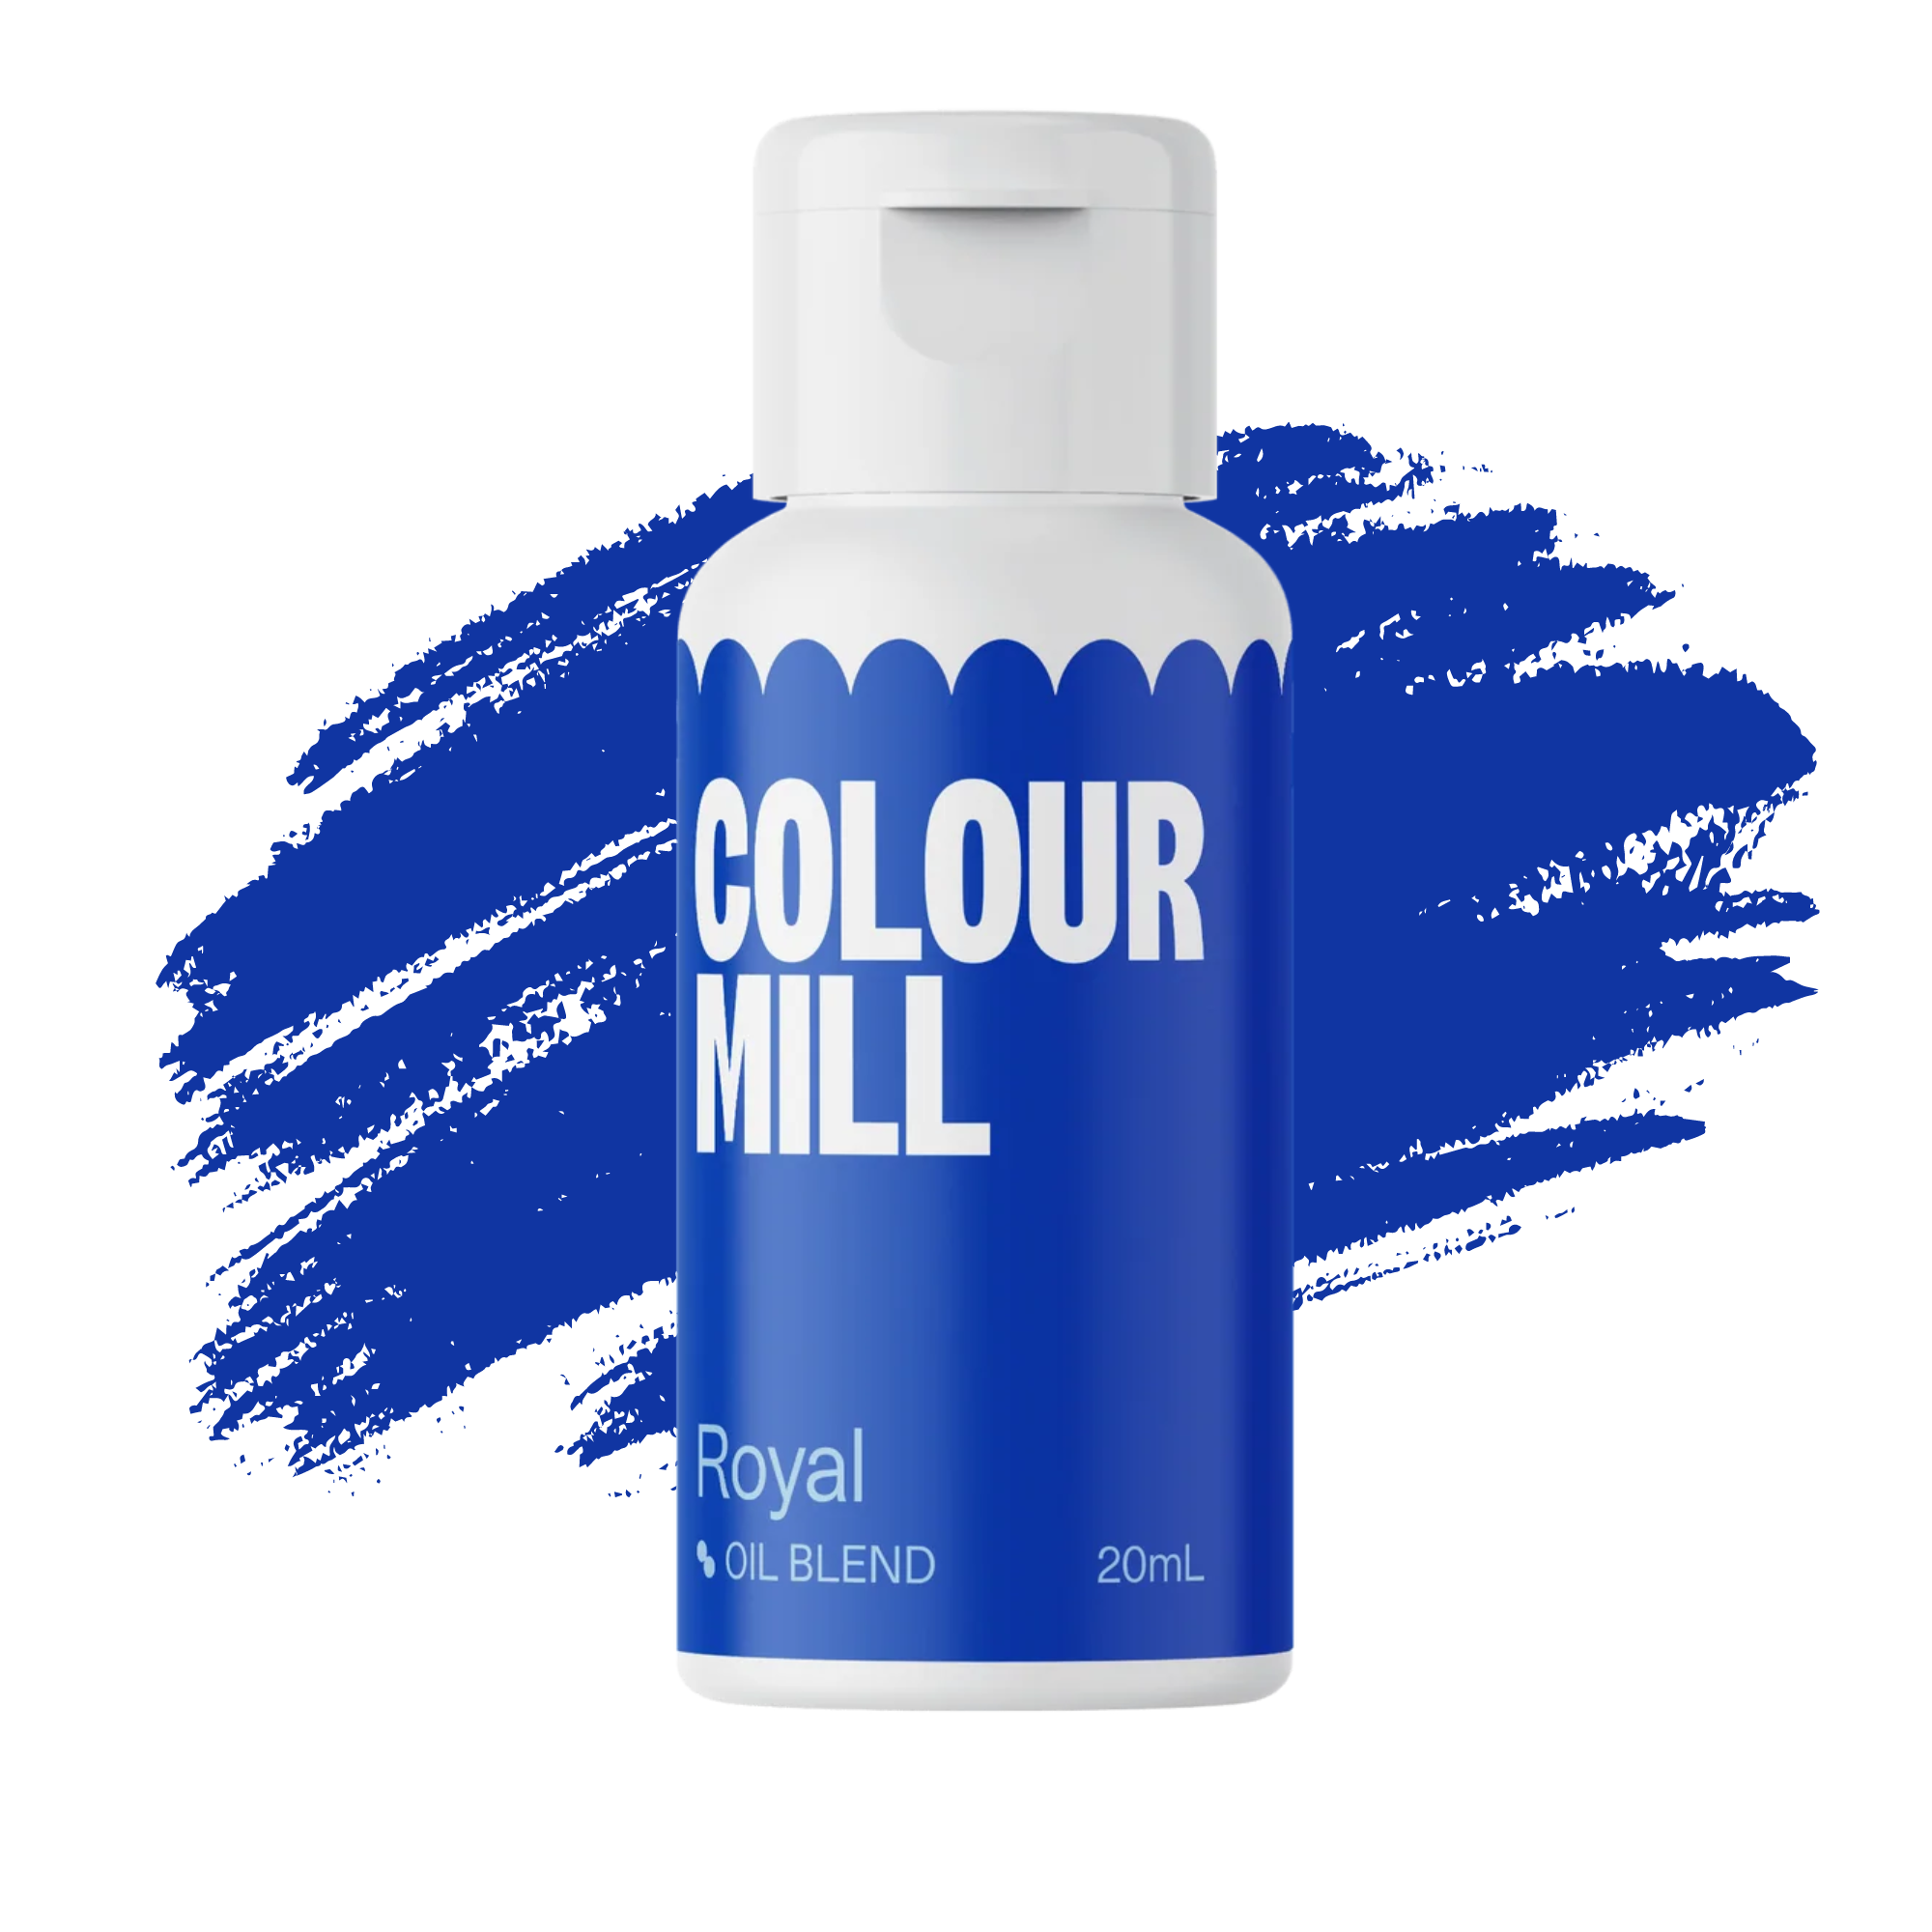 Colour Mill Oil Based Food Grade Colouring - Royal Blue - Kate's Cupboard